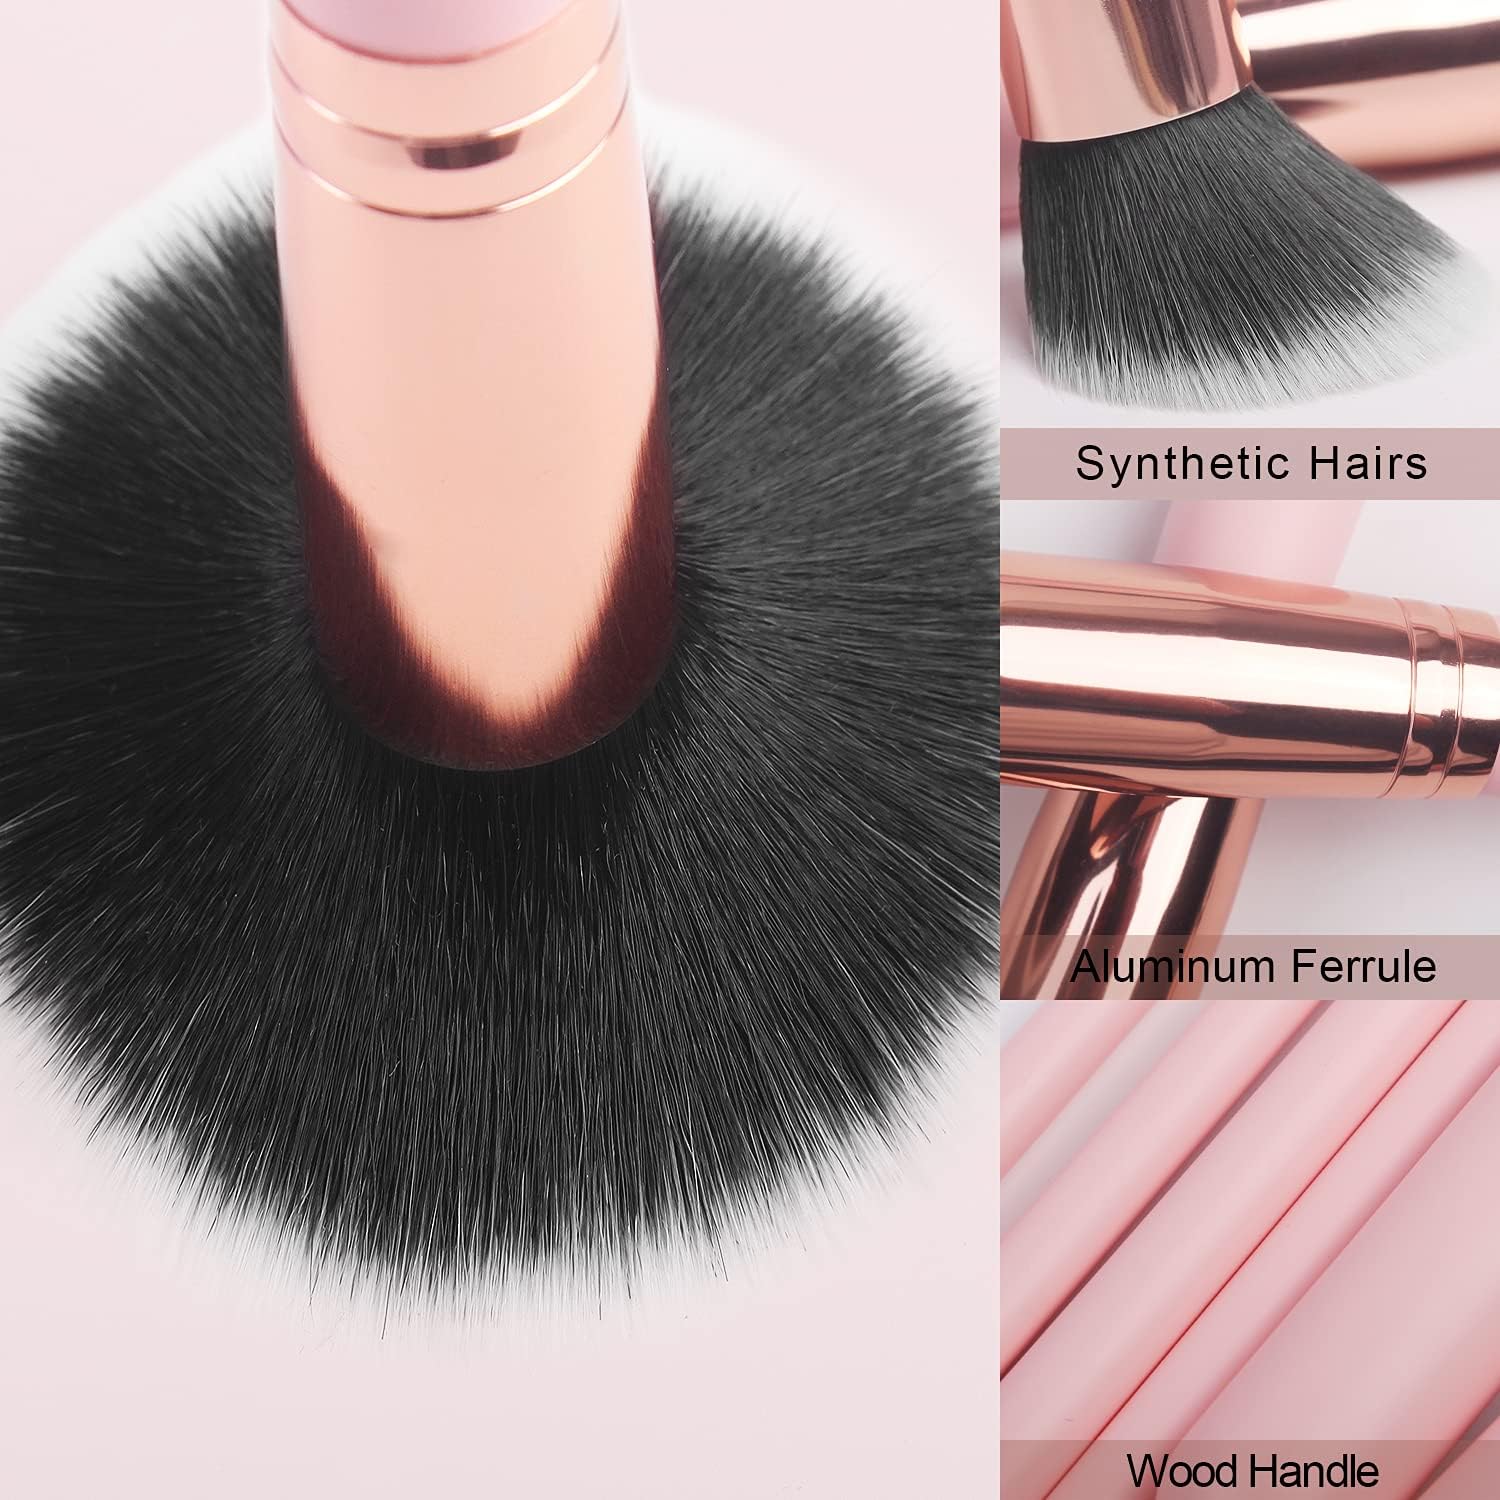 The 16-Piece Makeup Brushes Set Kit with Premium Synthetic Bristles and an Eyebrow Razor comes with a hood handle